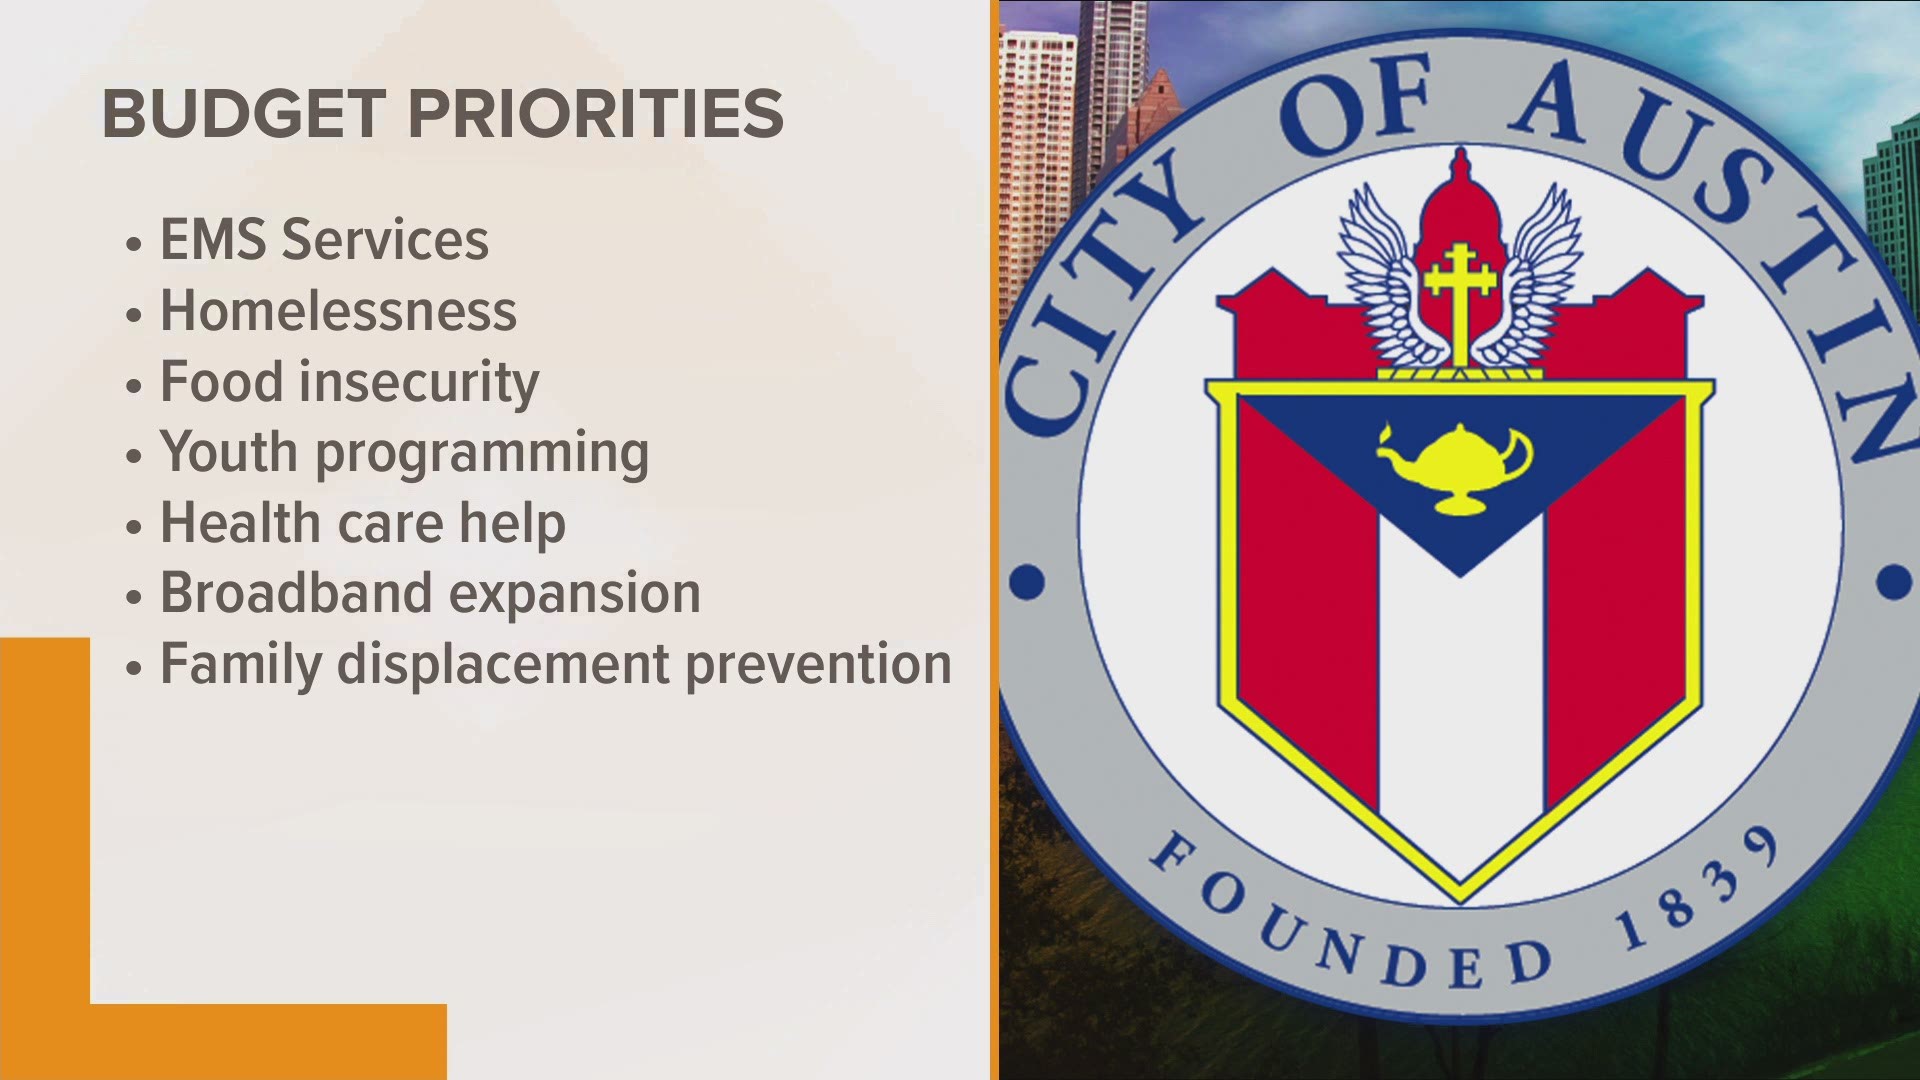 On Friday, Austin's city manager will present a proposed budget to the city council for the next fiscal year.